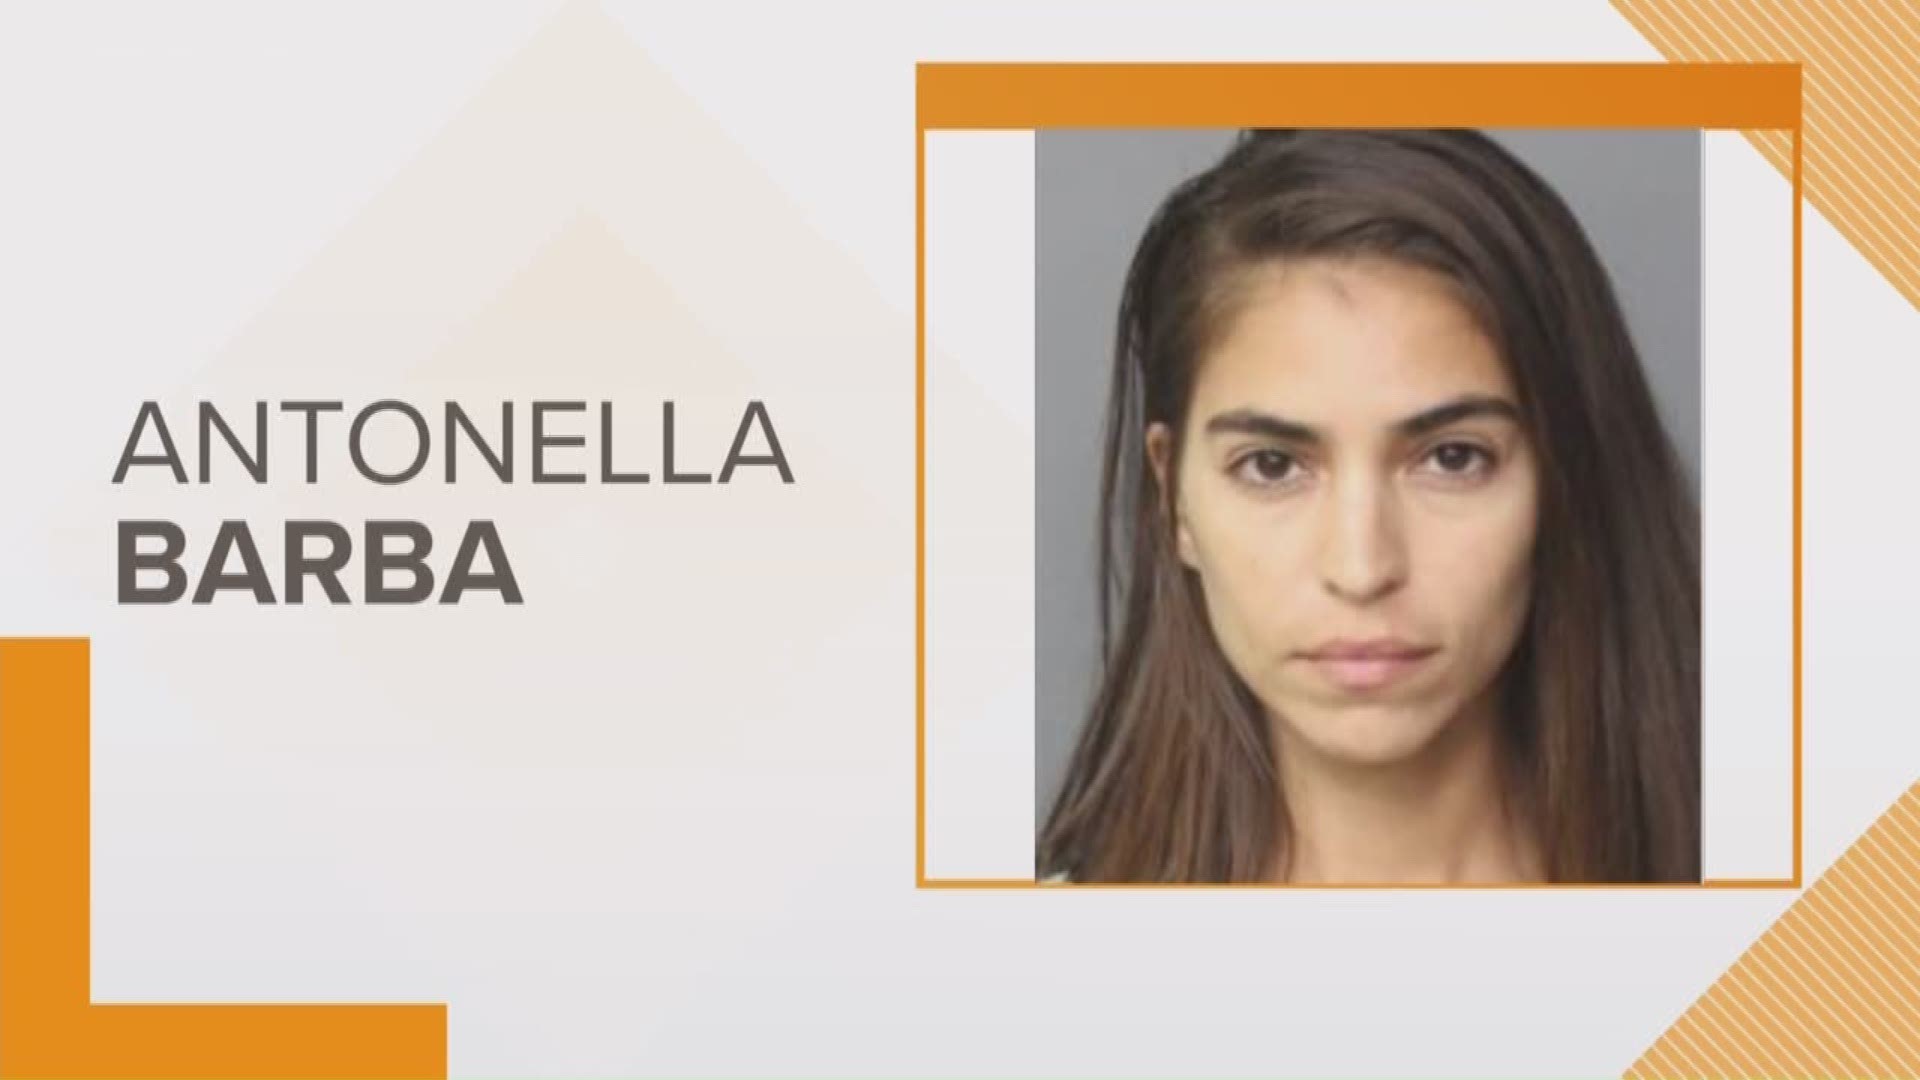 Antonella Barba, who competed on Season 6 of 'American Idol,' was arrested and charged with heroin distribution last week in Norfolk.